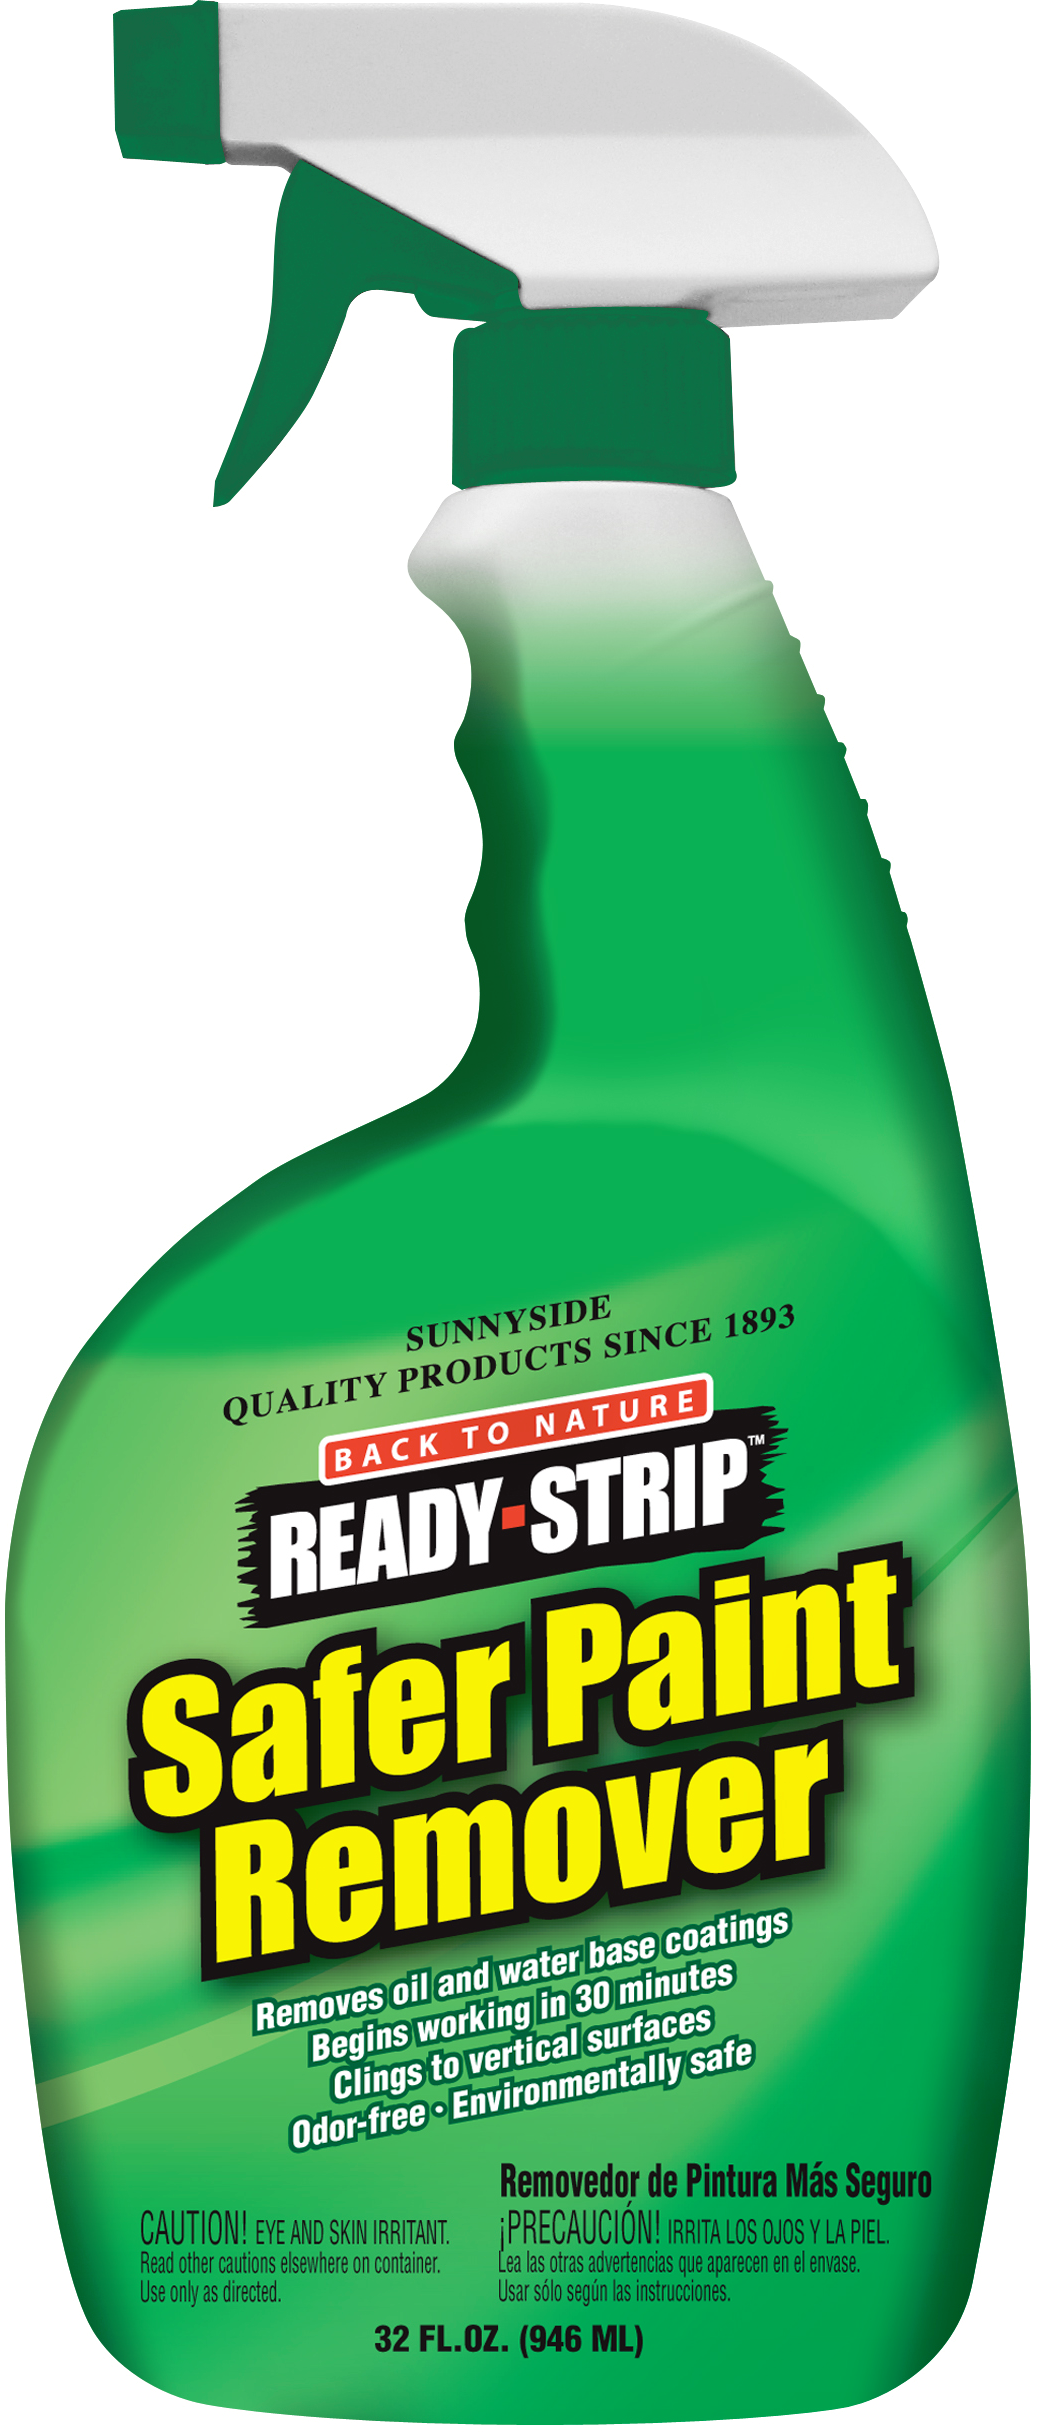 BACK TO NATURE READY-STRIP SAFER PAINT REMOVER SPRAY Product Image